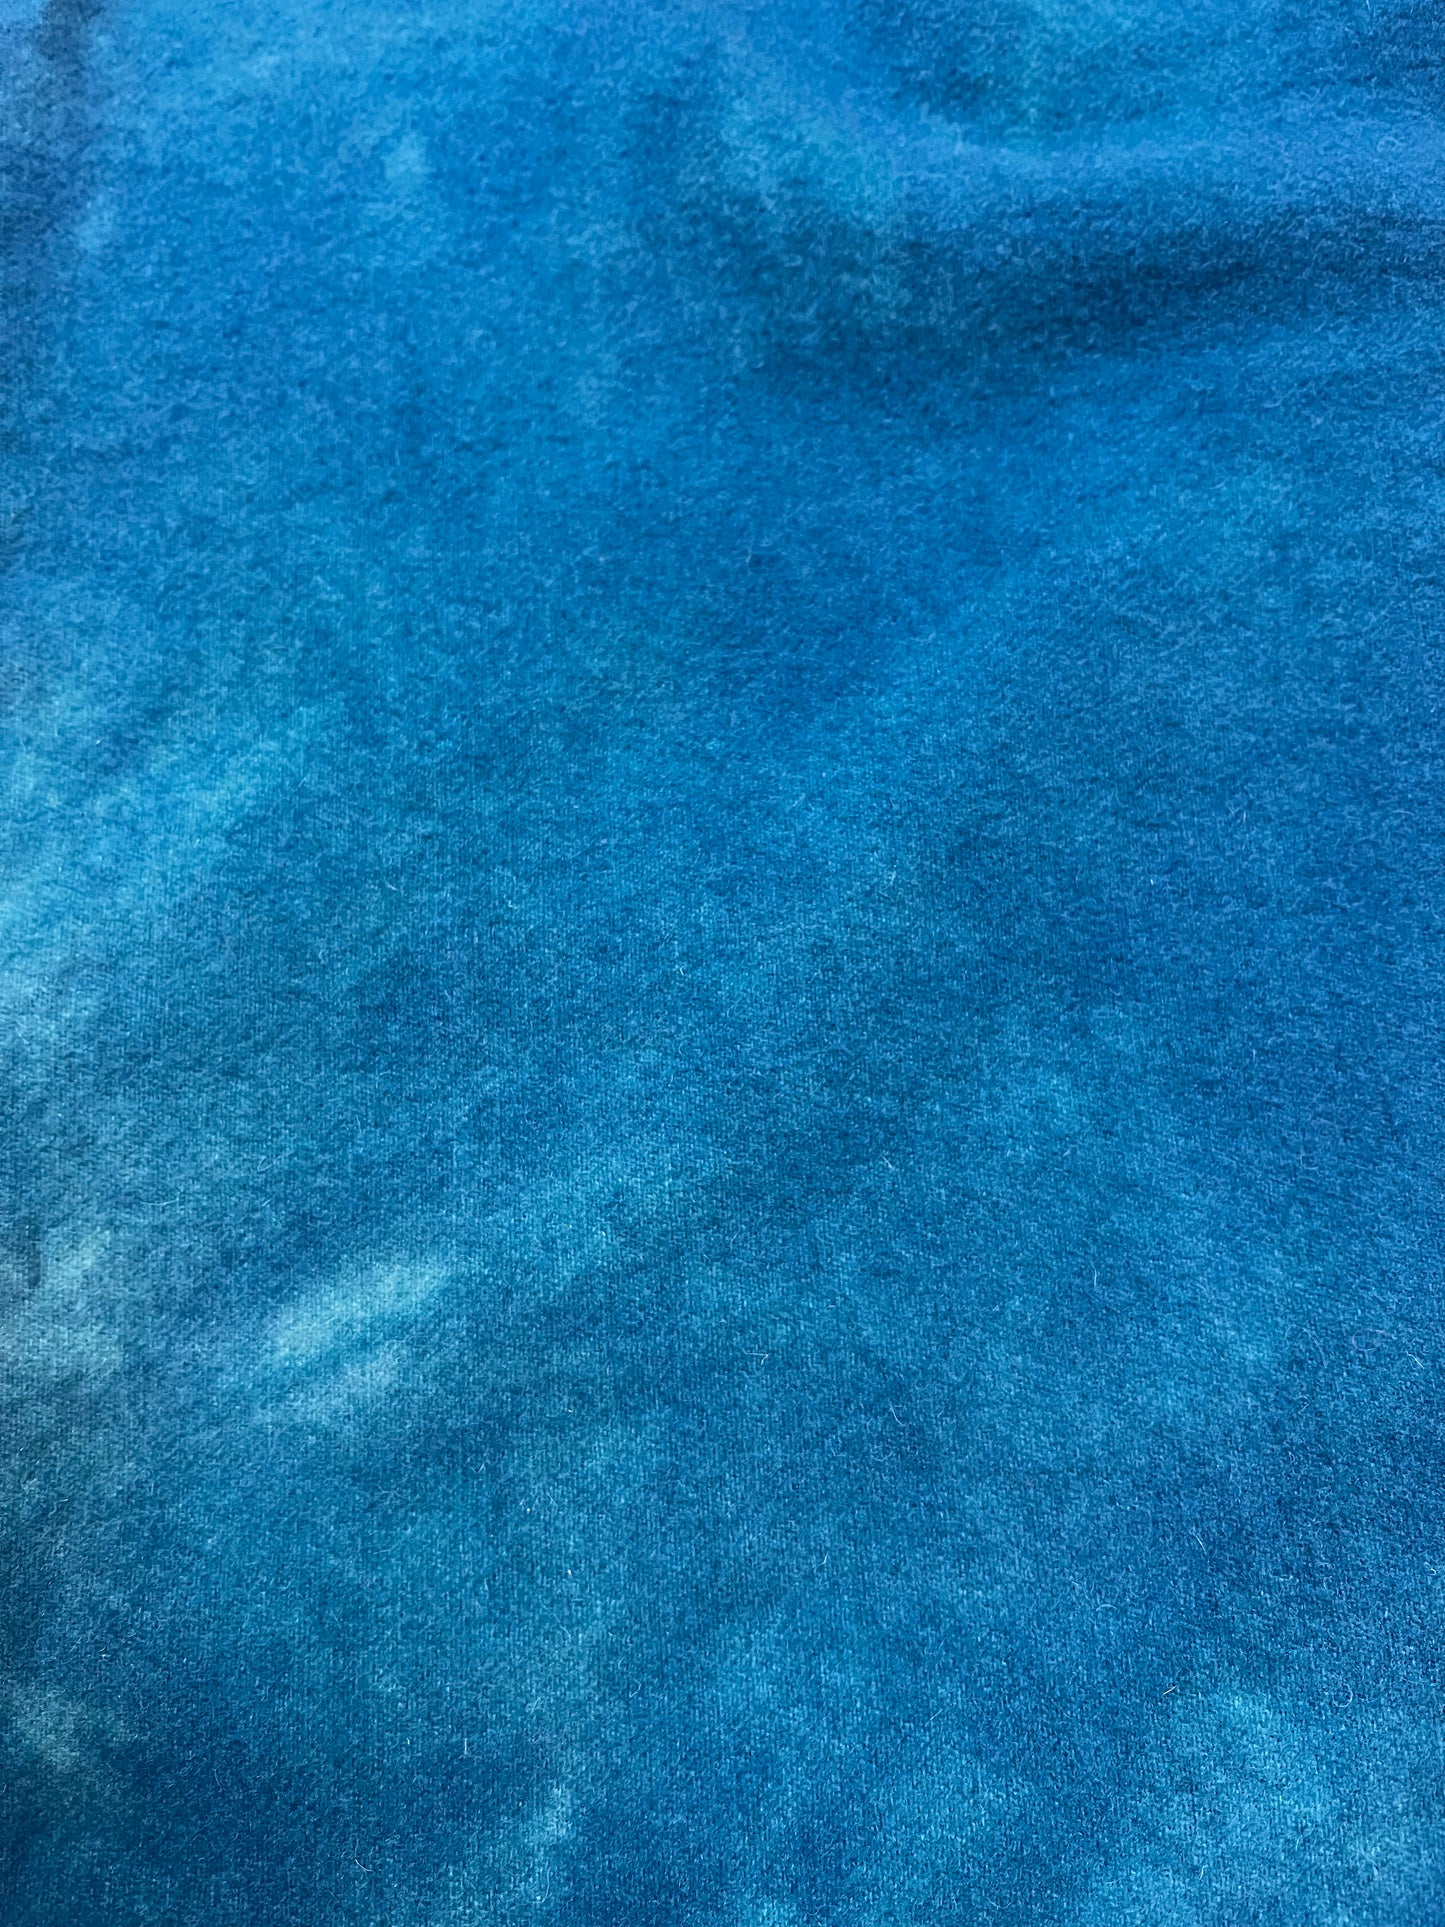 Hand Dyed Wool, Fat Quarter, PACIFIC BLUE